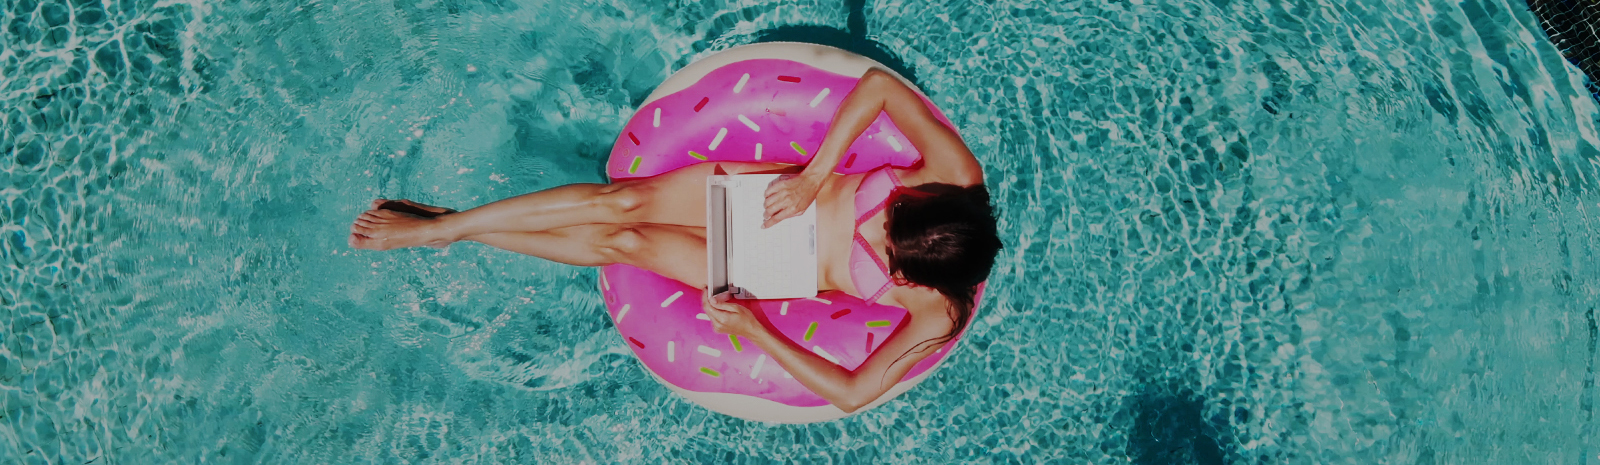 woman inside a pink inflatable at the pool